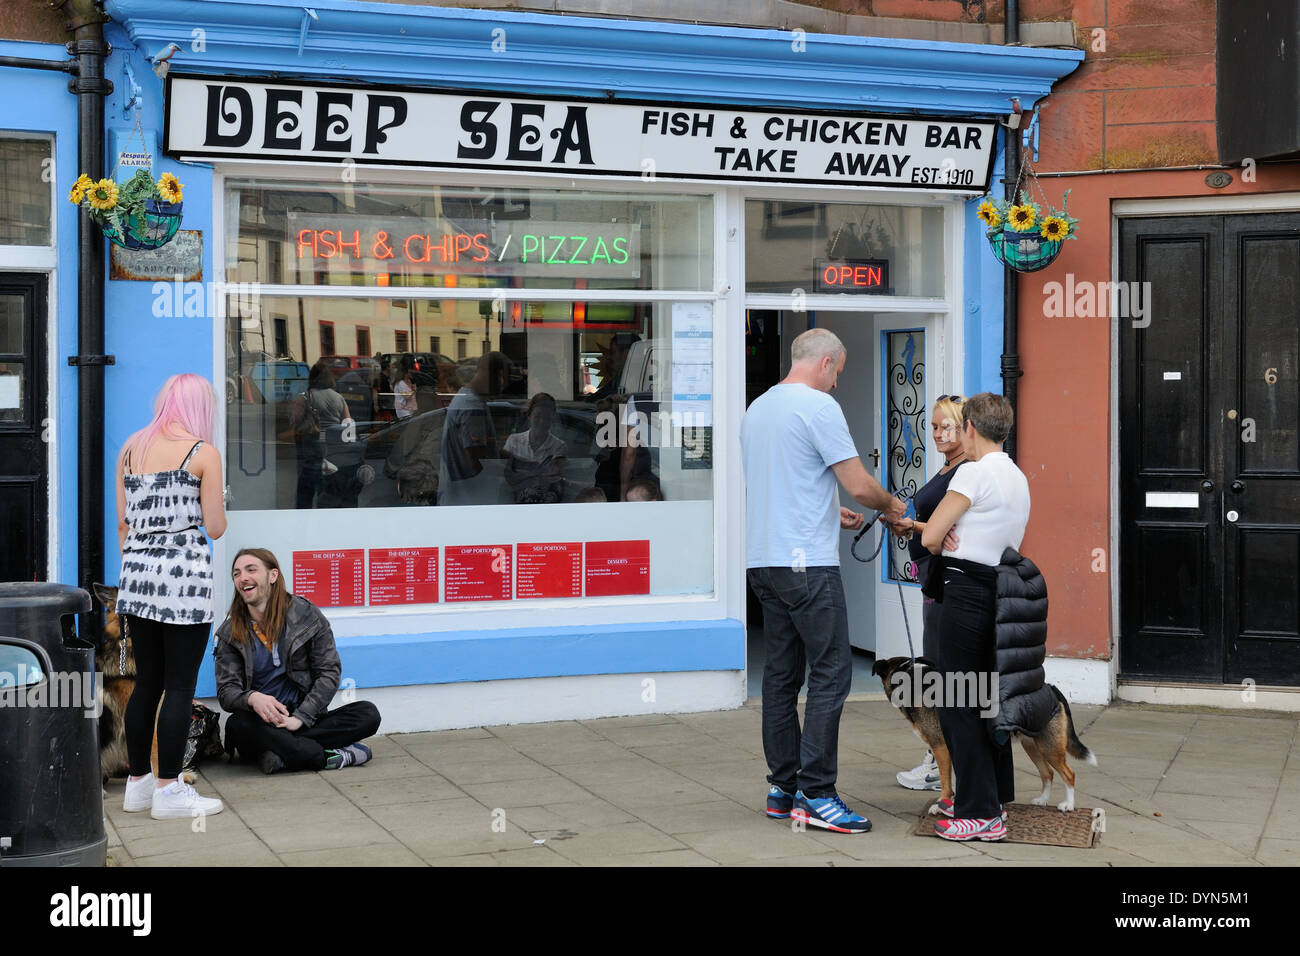 The Deep Sea fish and chicken bar in Millport on the Isle of Cumbrae, Scotland, UK. Stock Photo